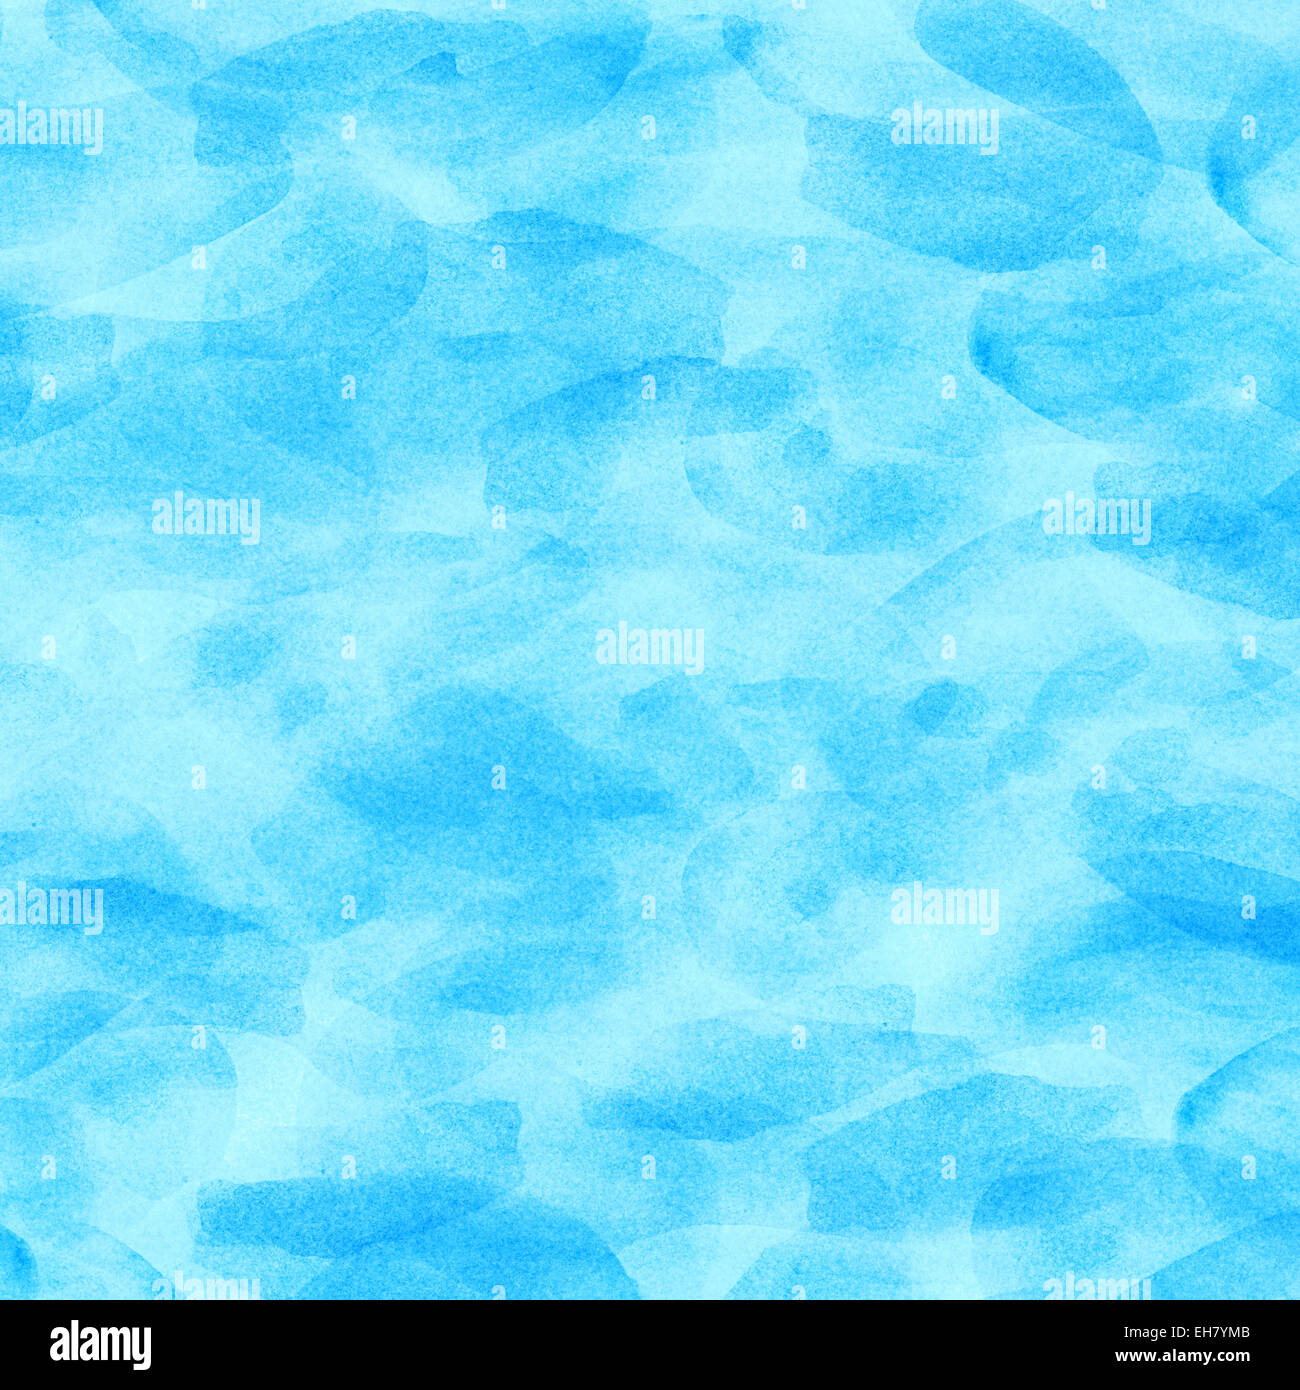 Abstract blue watercolor background. Stock Photo